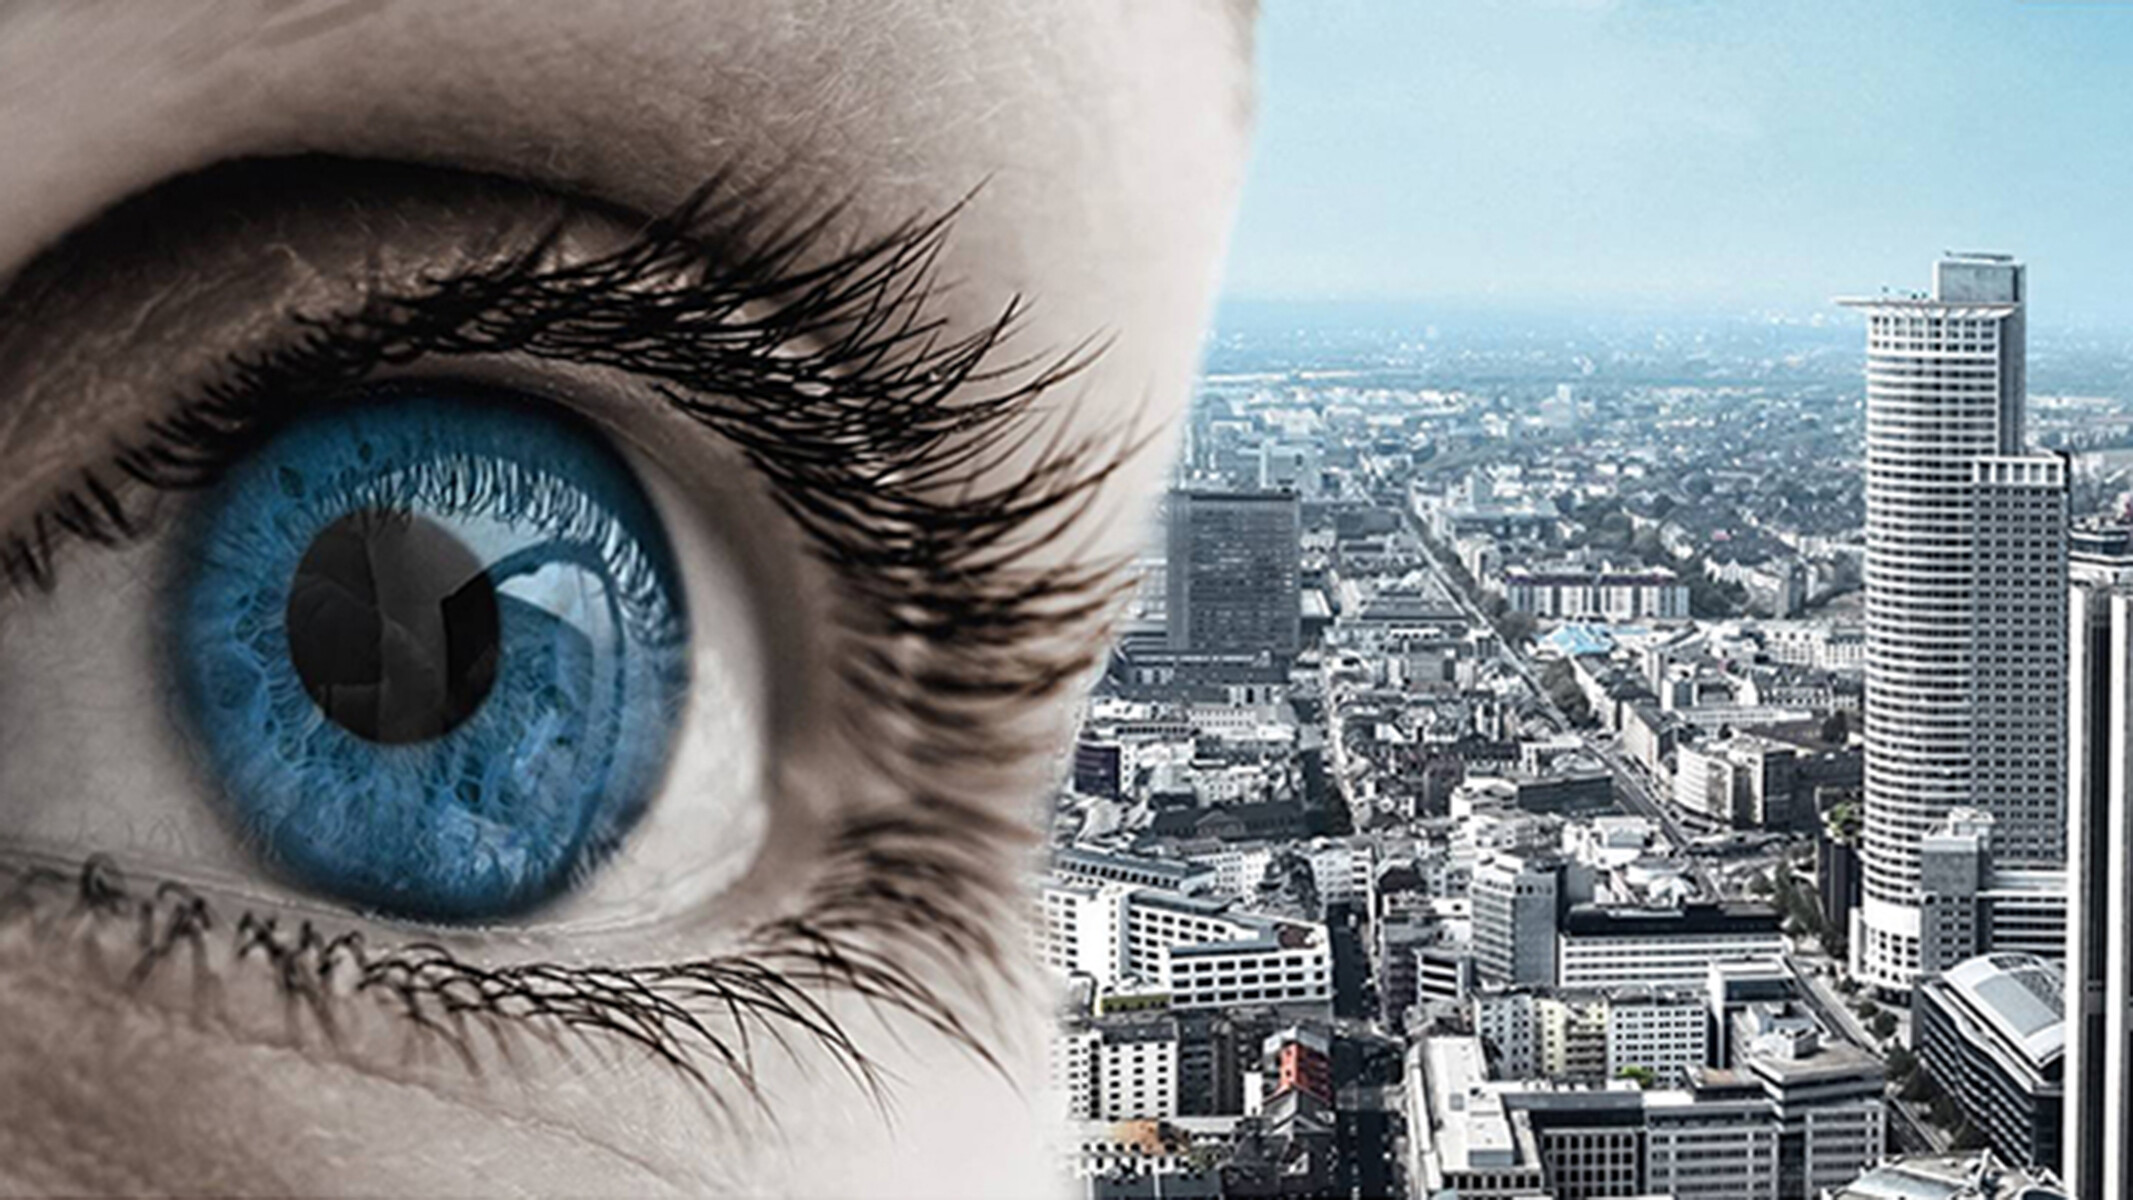 Eye looking over a large city